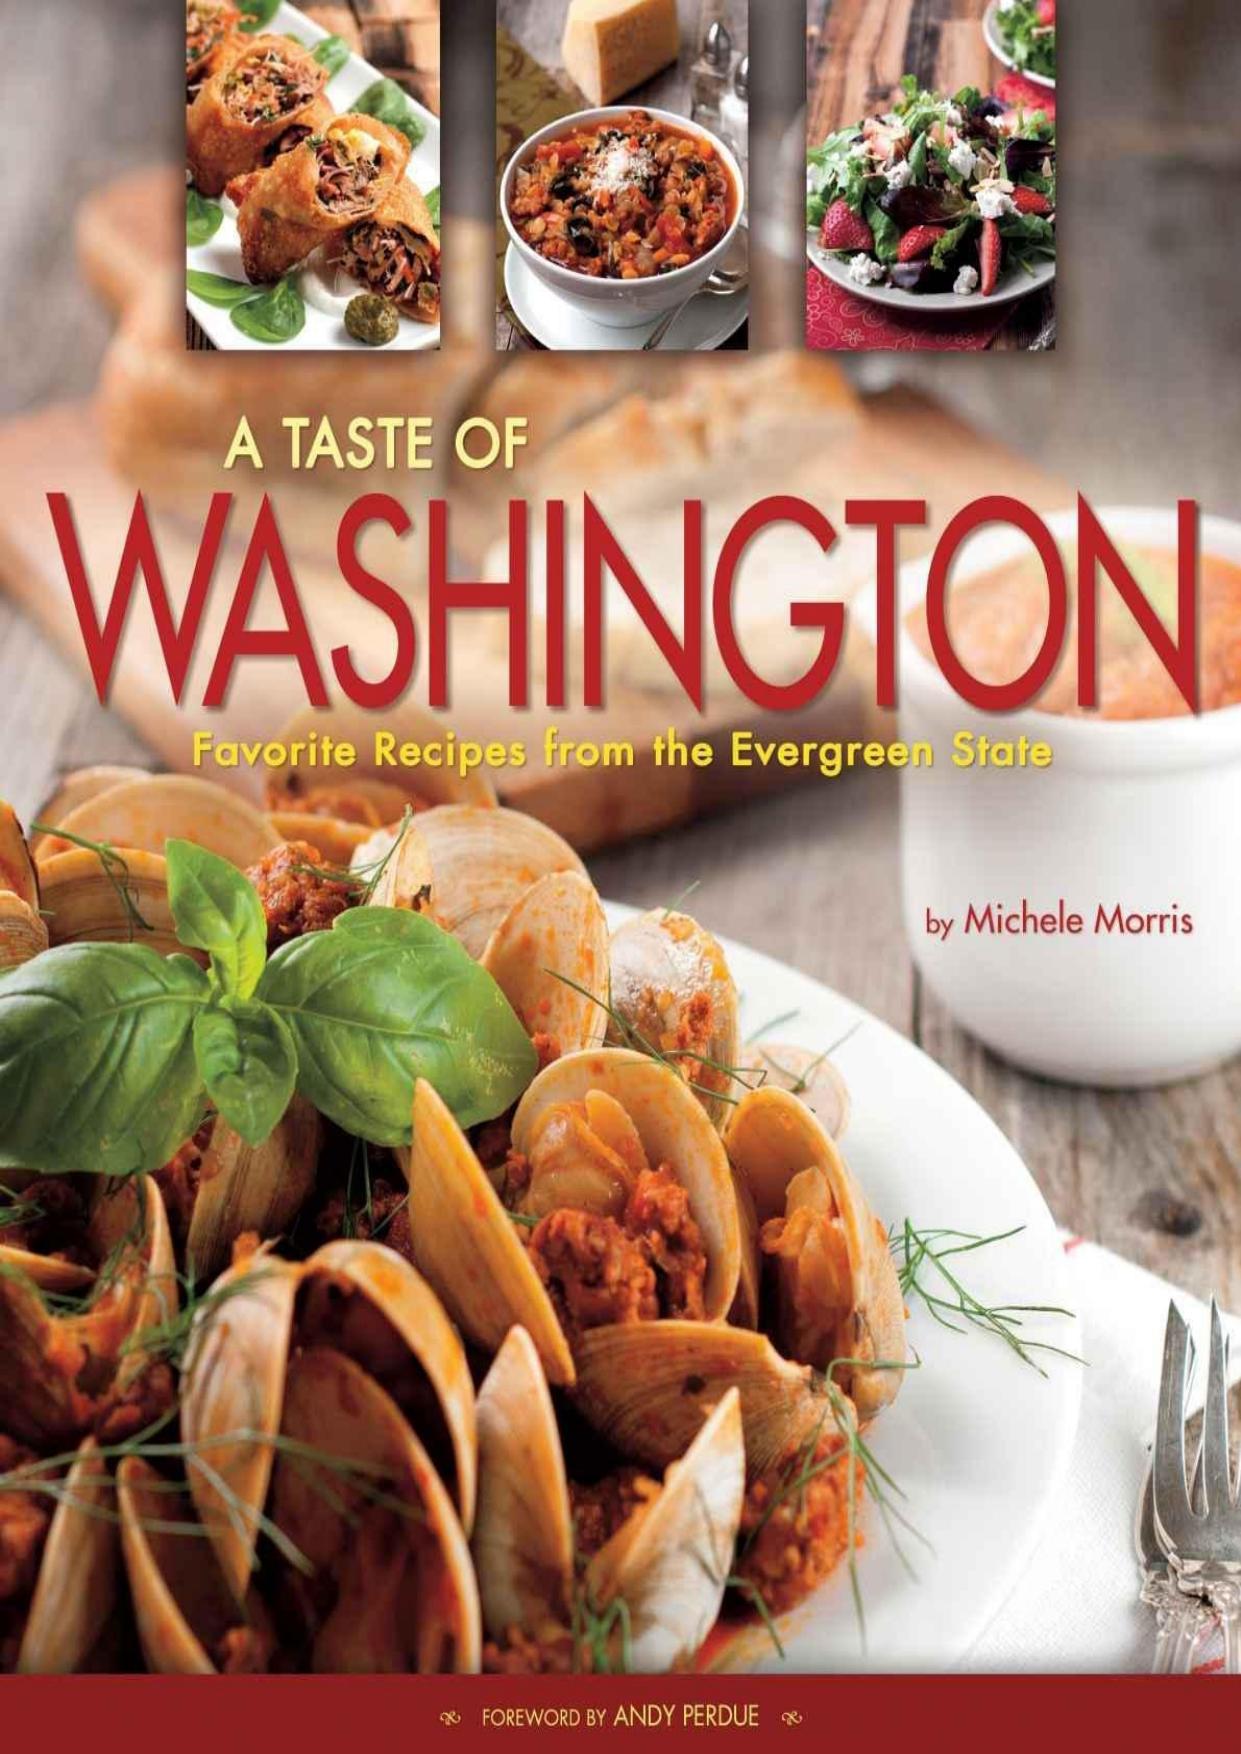 A Taste of Washington: Favorite Recipes from the Evergreen State by Michele Morris